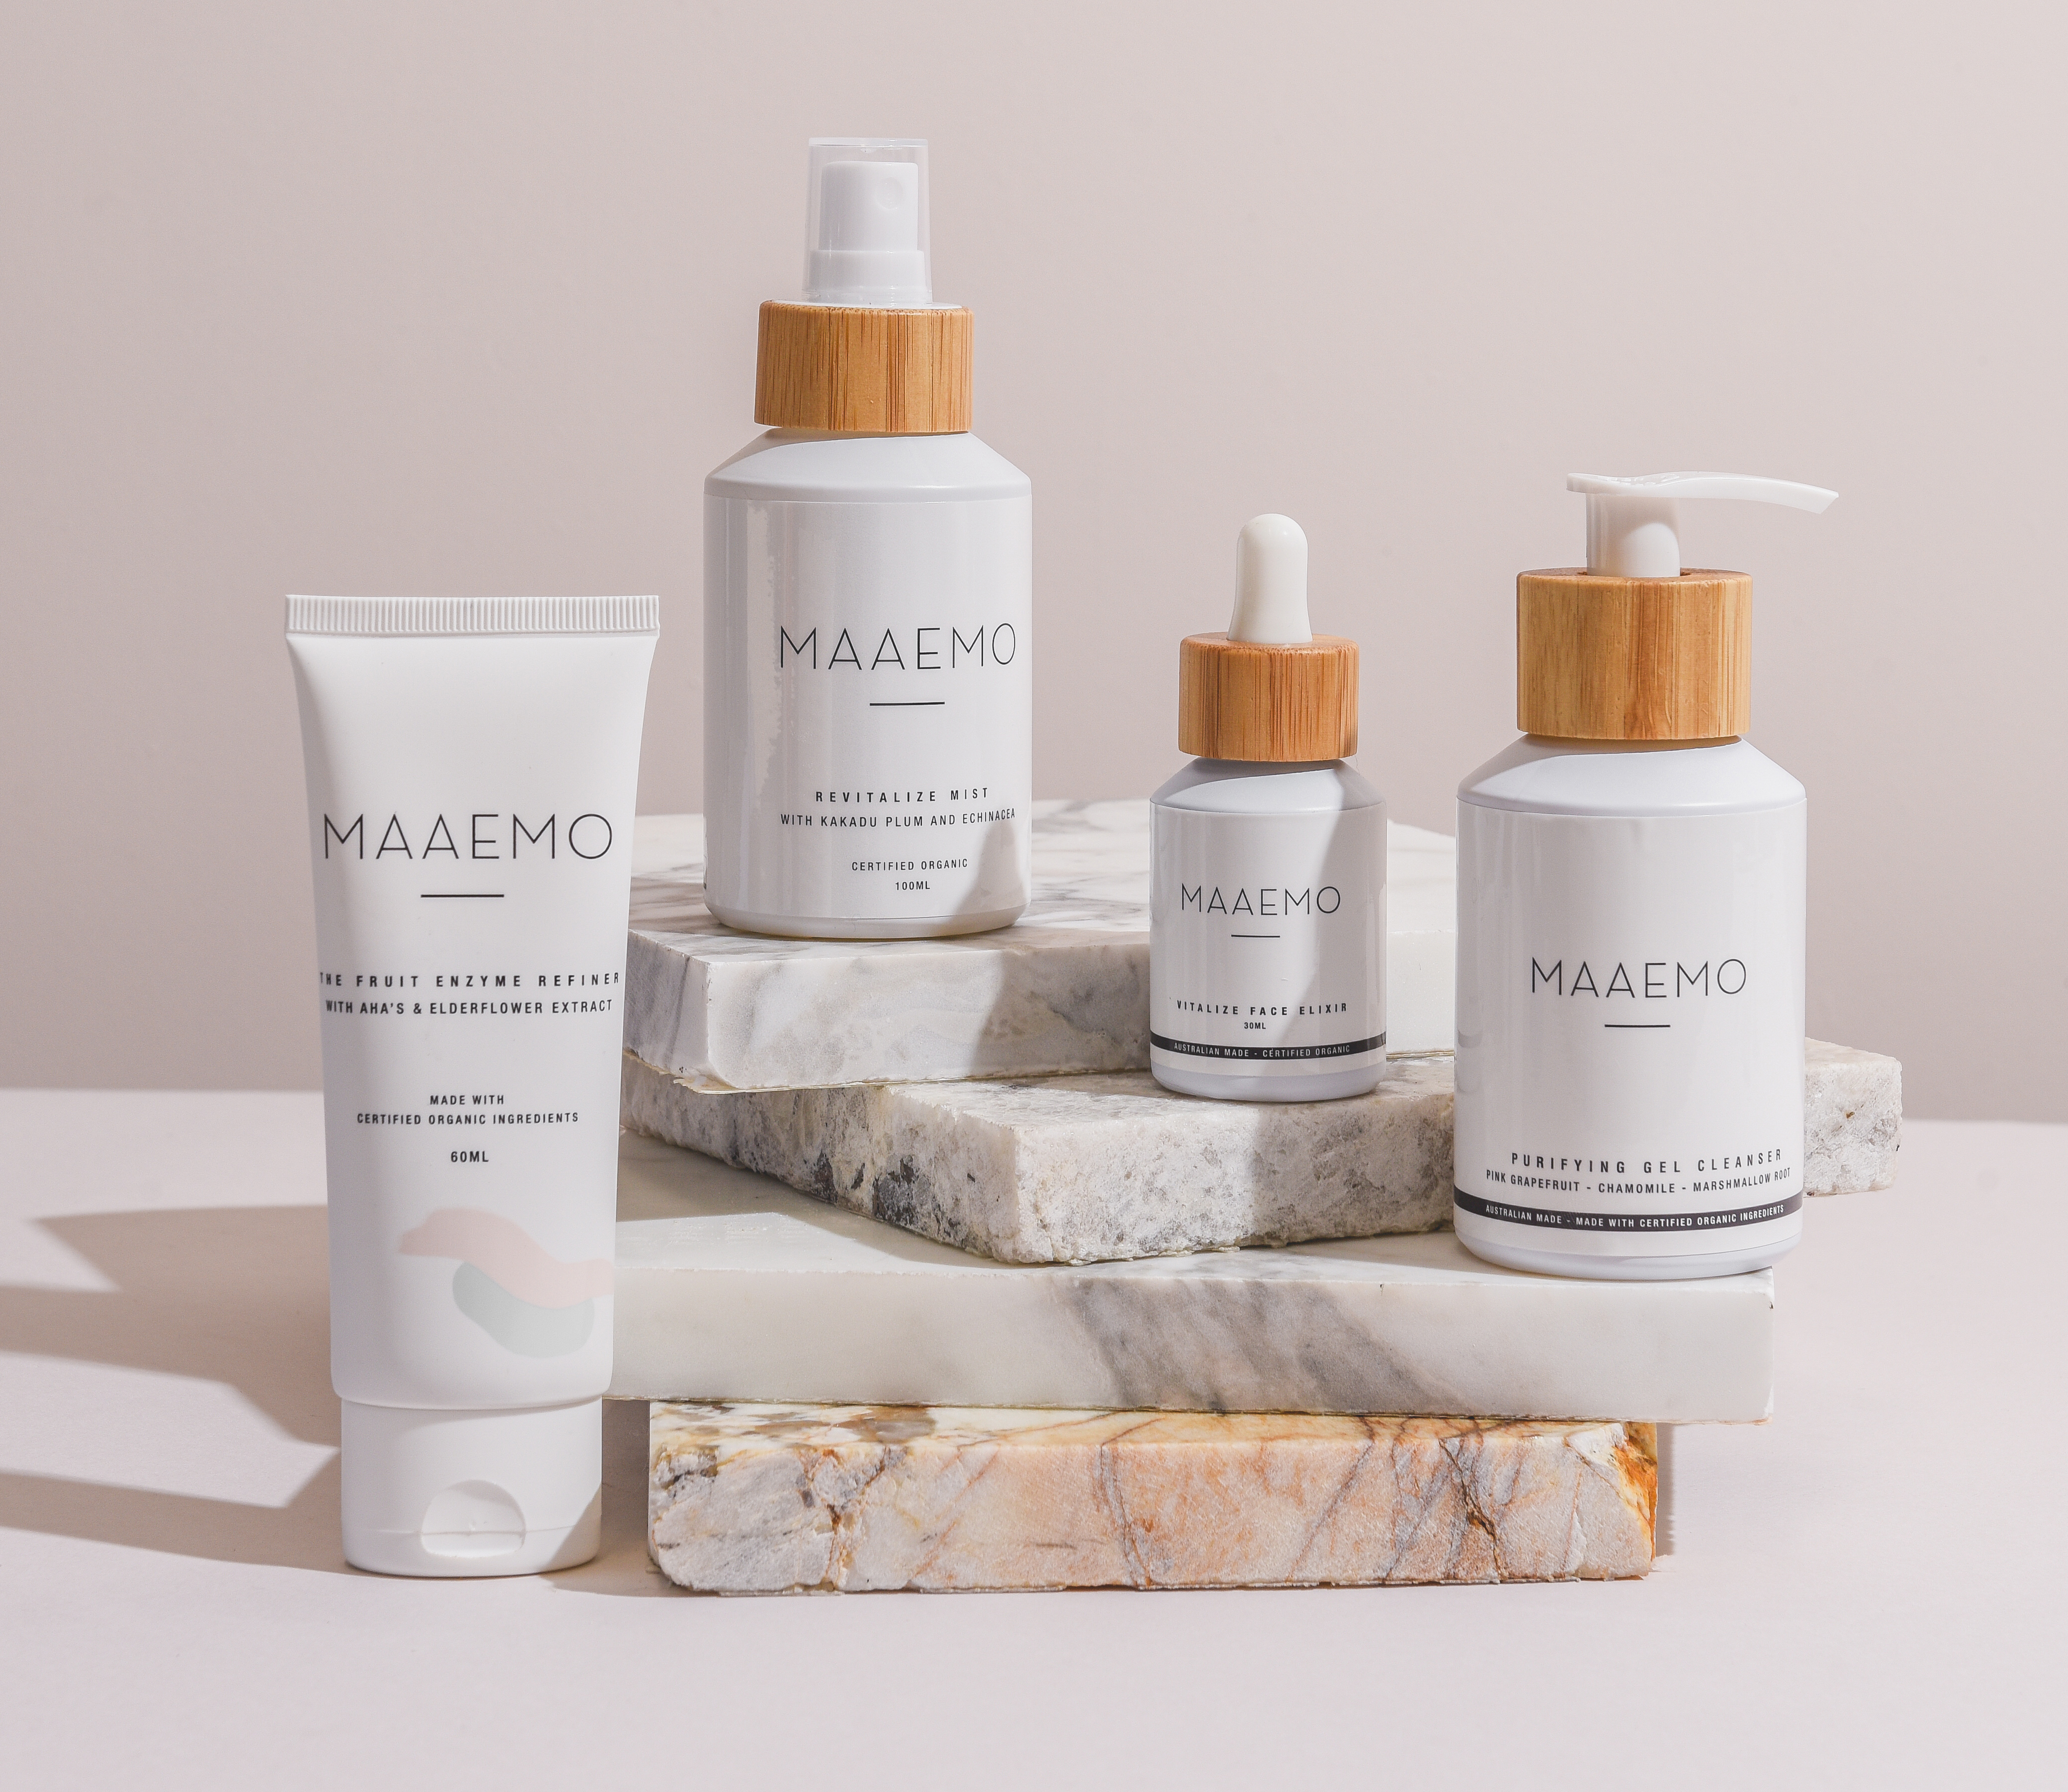 MAAEMO founder Hillary Wilcox on herbal medicine and skincare